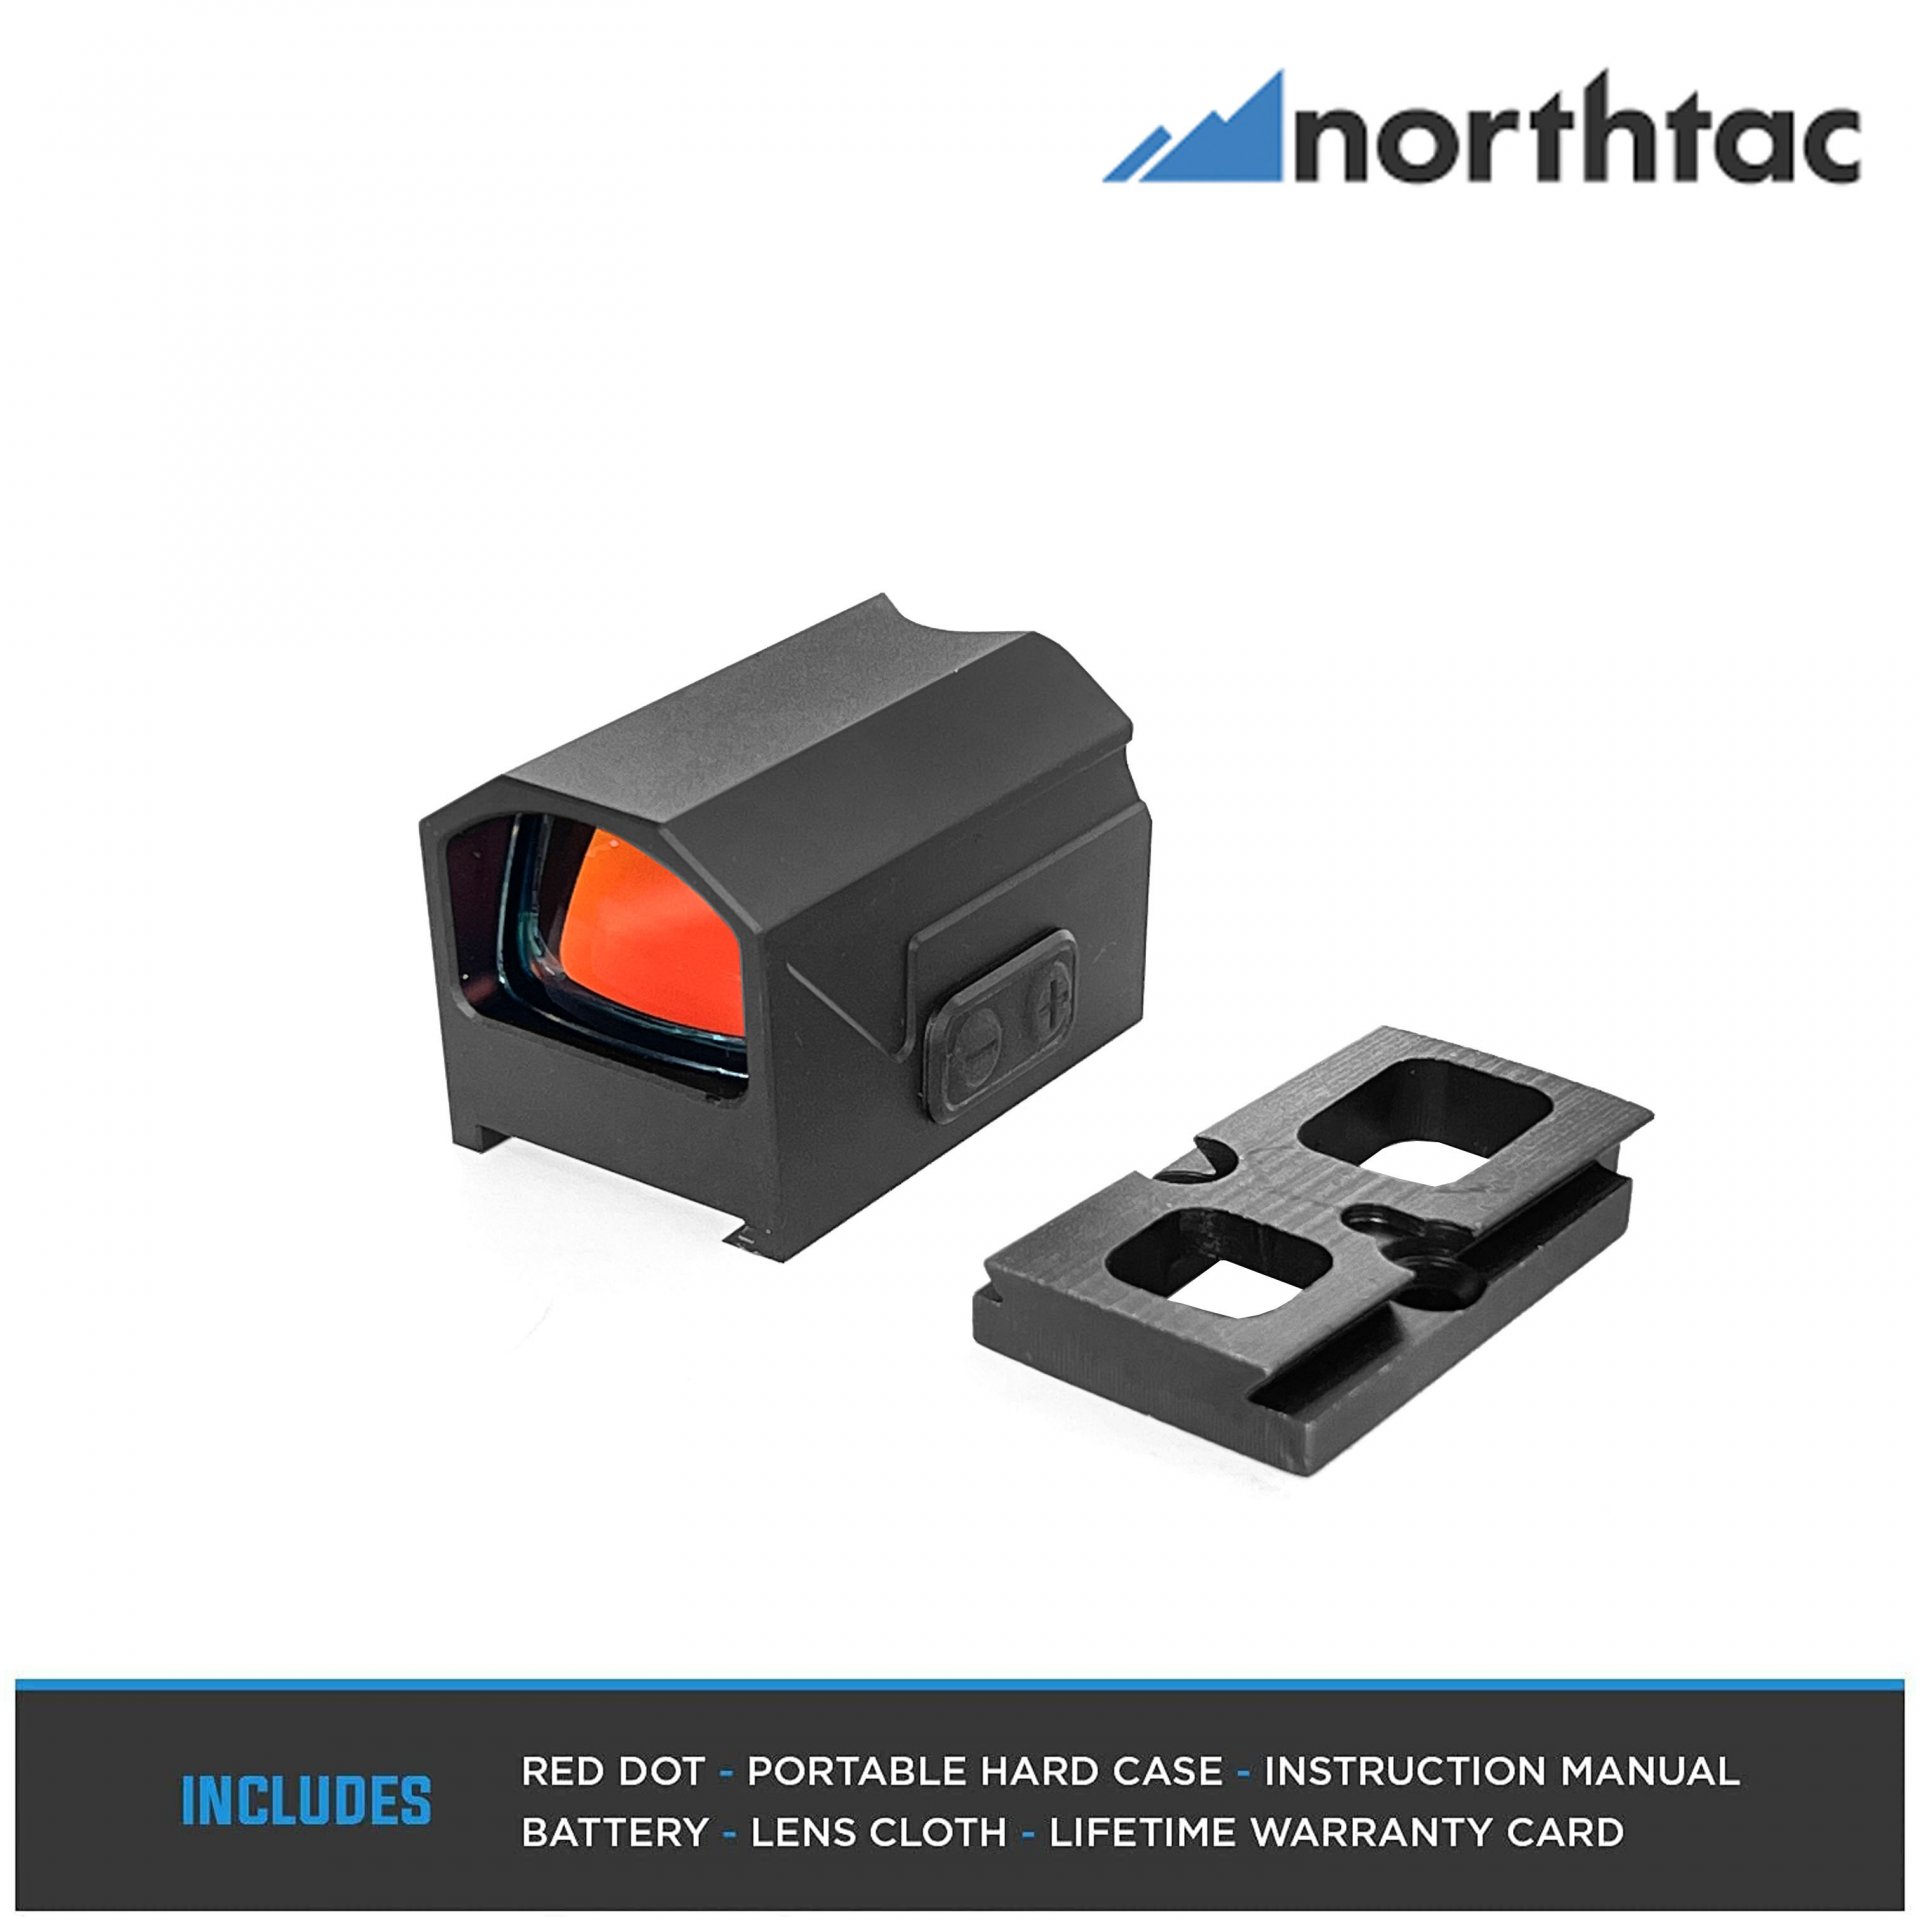 Northtac RONIN F11 Micro Red Dot